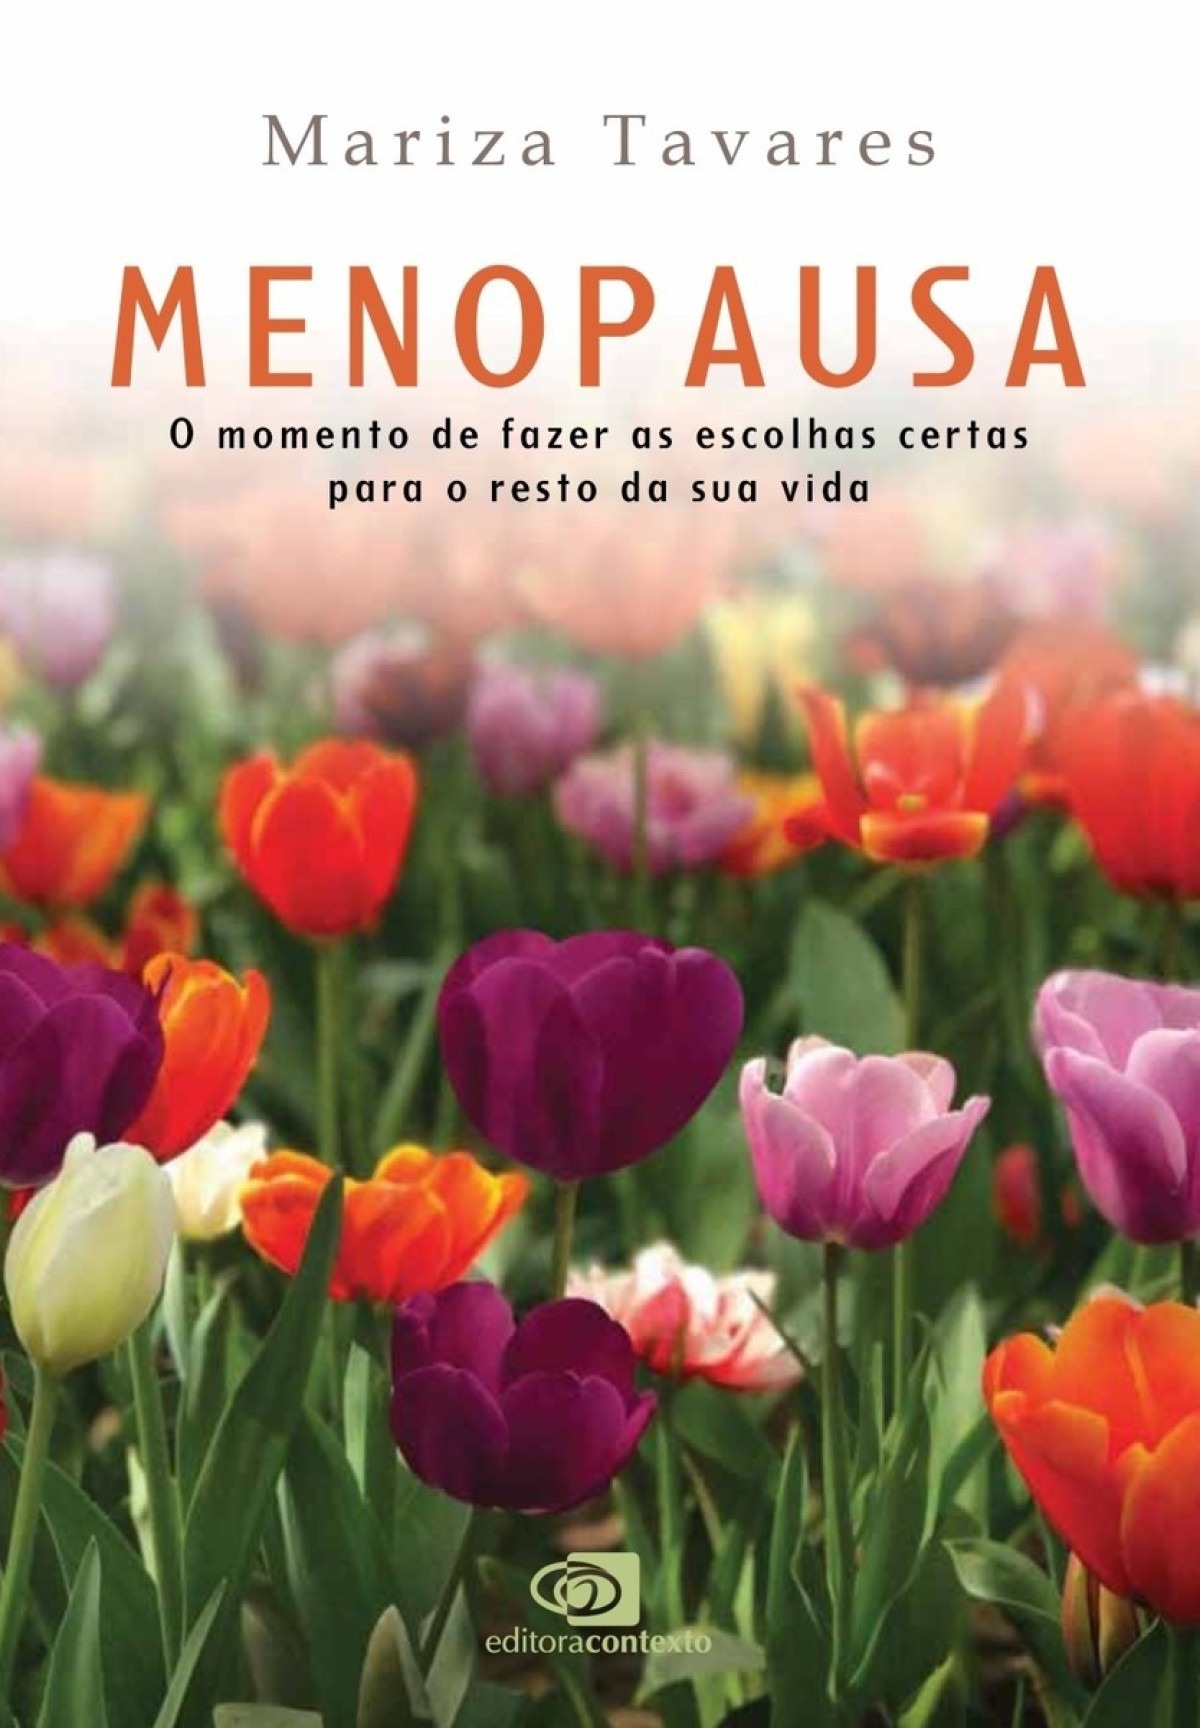  Menopause: Time to make the right choice for the rest of your life